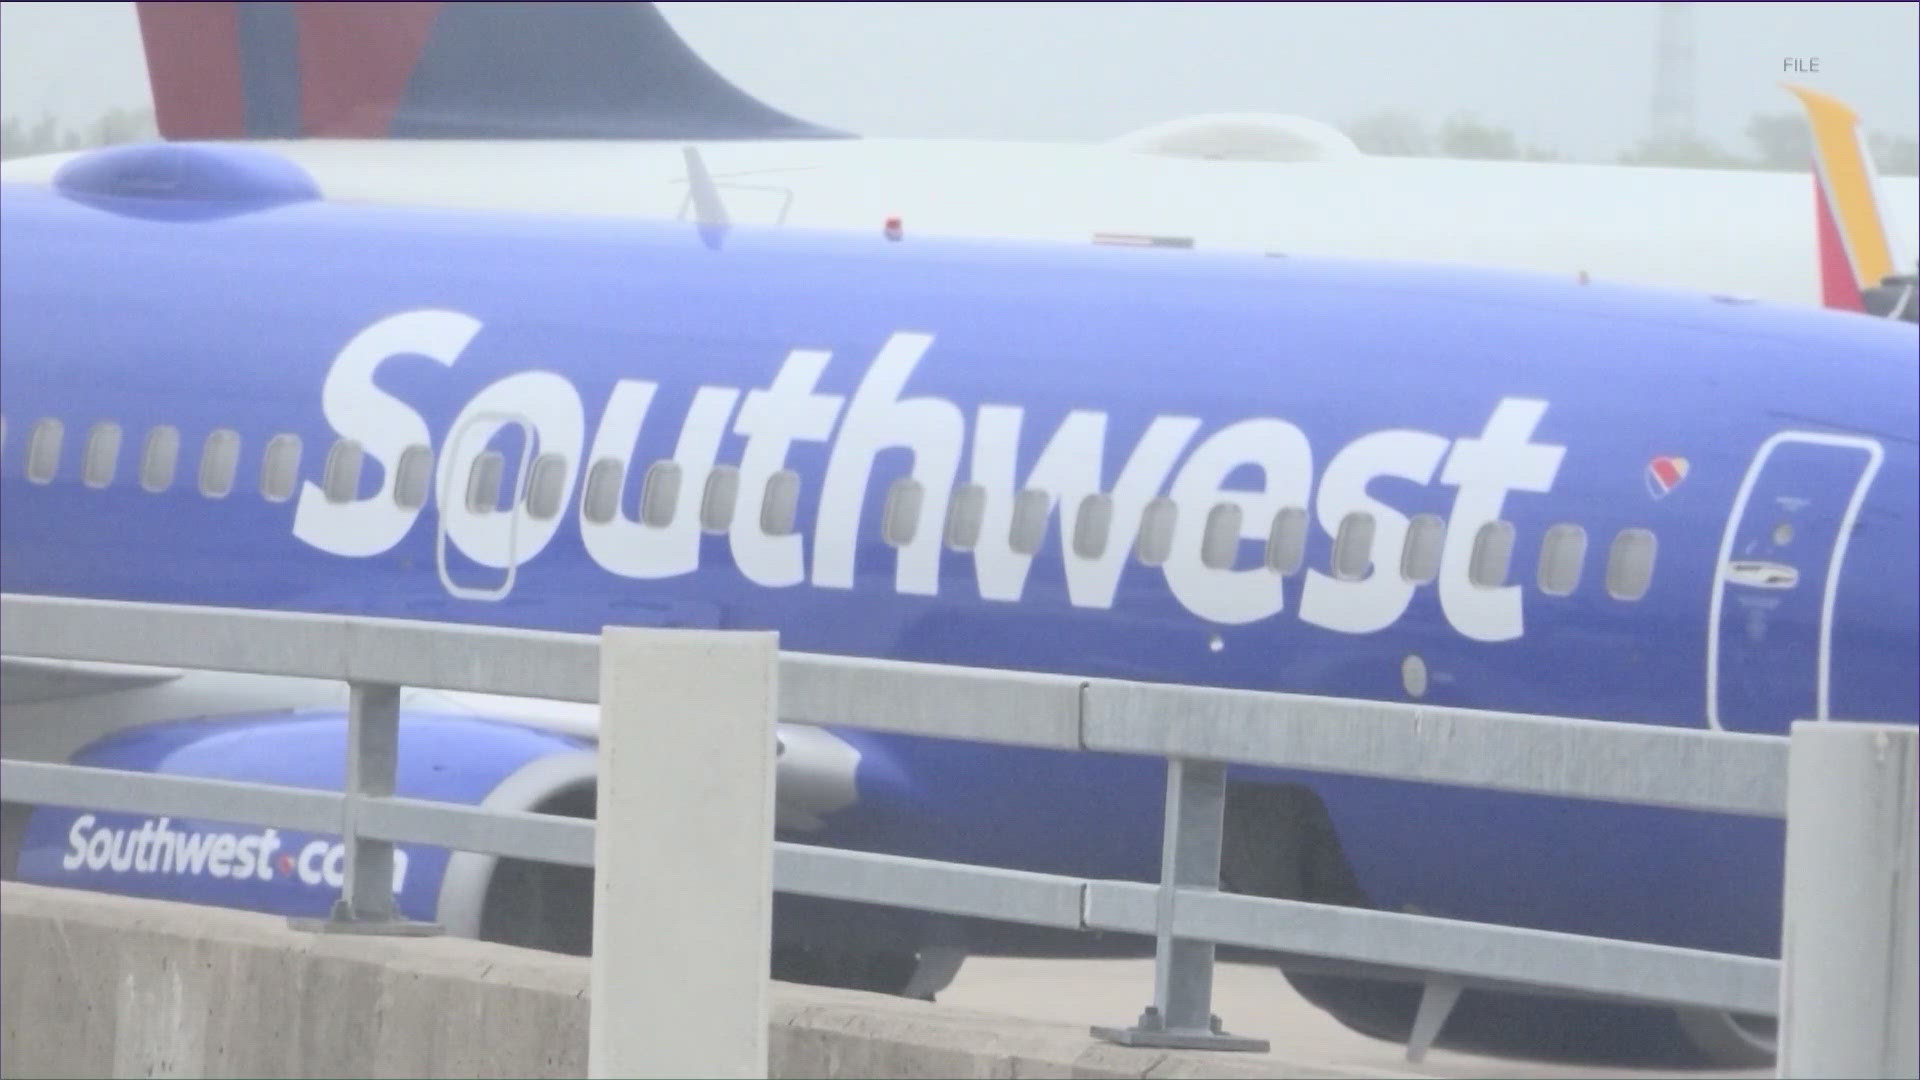 The report from J.D. Power ranked the Dallas-based airline in the top spot for the third straight year.